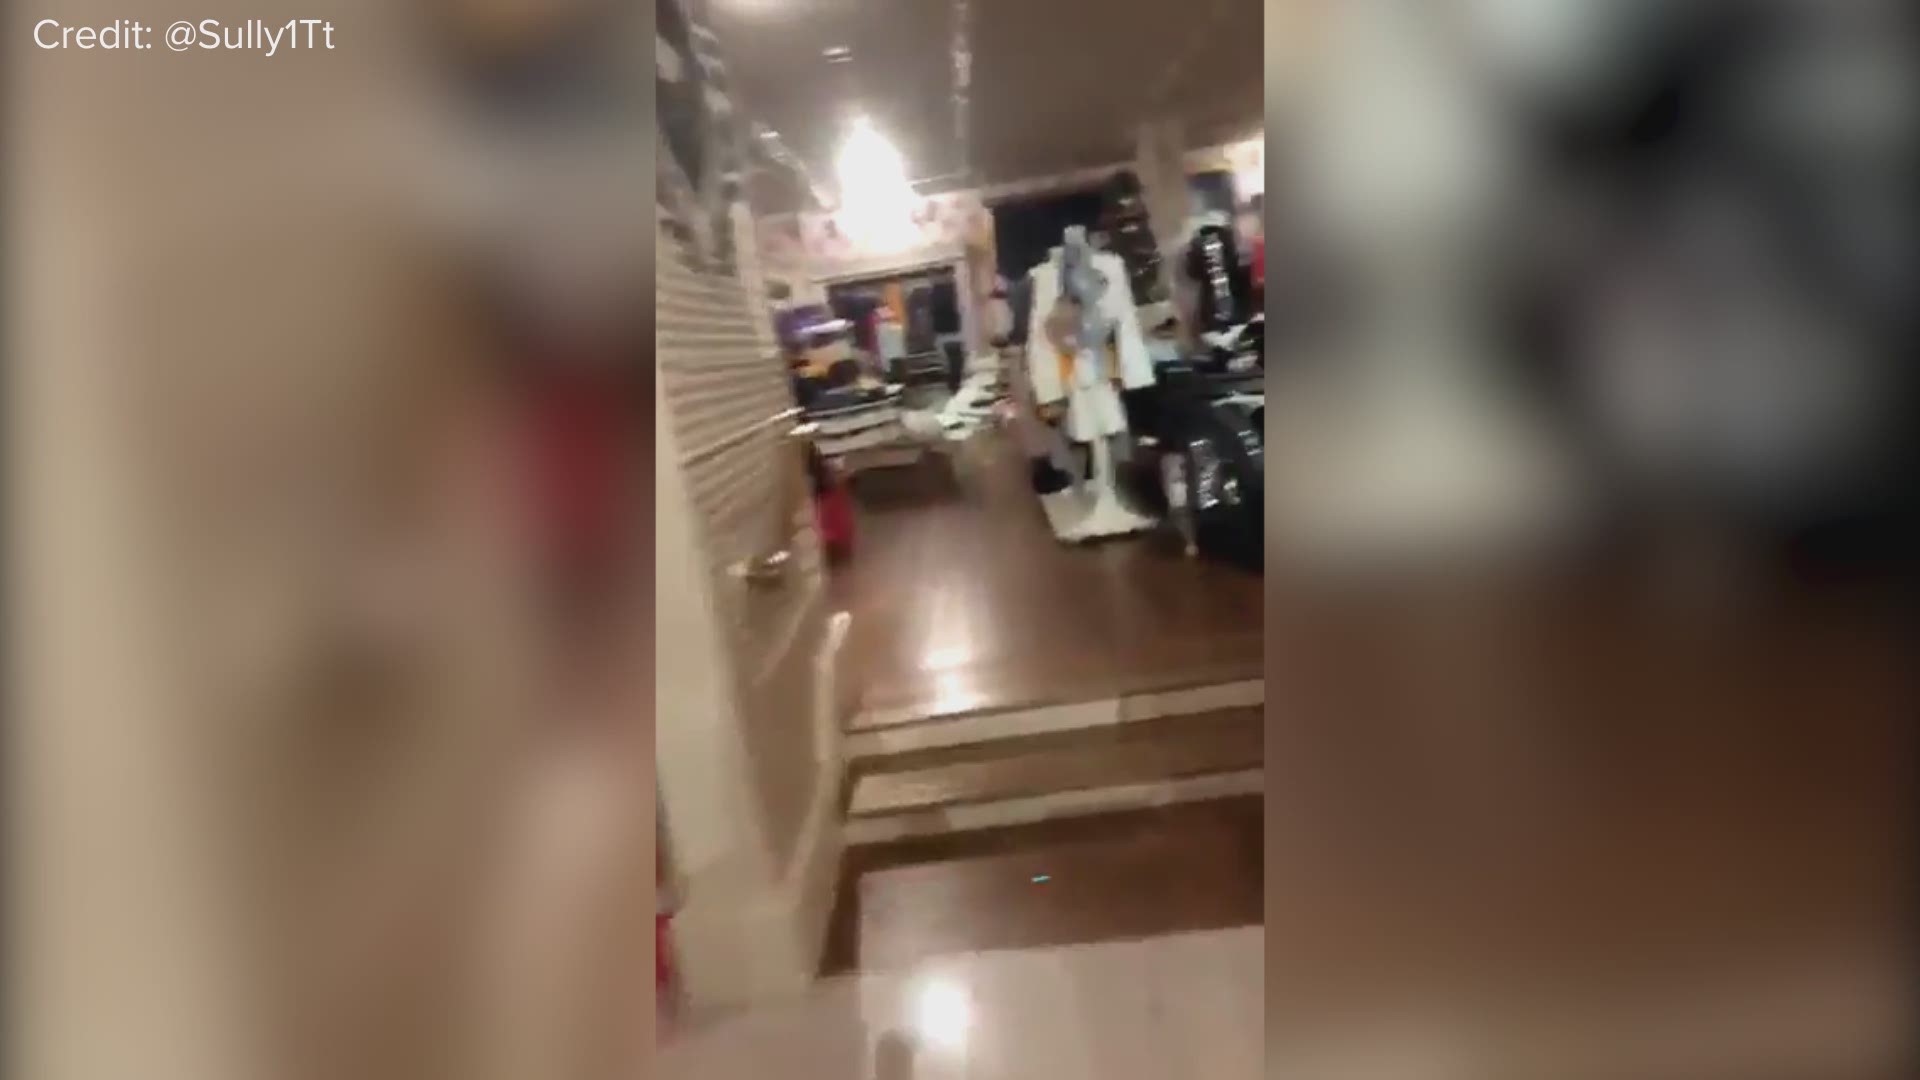 Products fell to the floor and alarms blared inside the Anchorage Fifth Avenue Mall after a 7.0 magnitude earthquake hit the area. (Courtesy: @Sully1Tt)